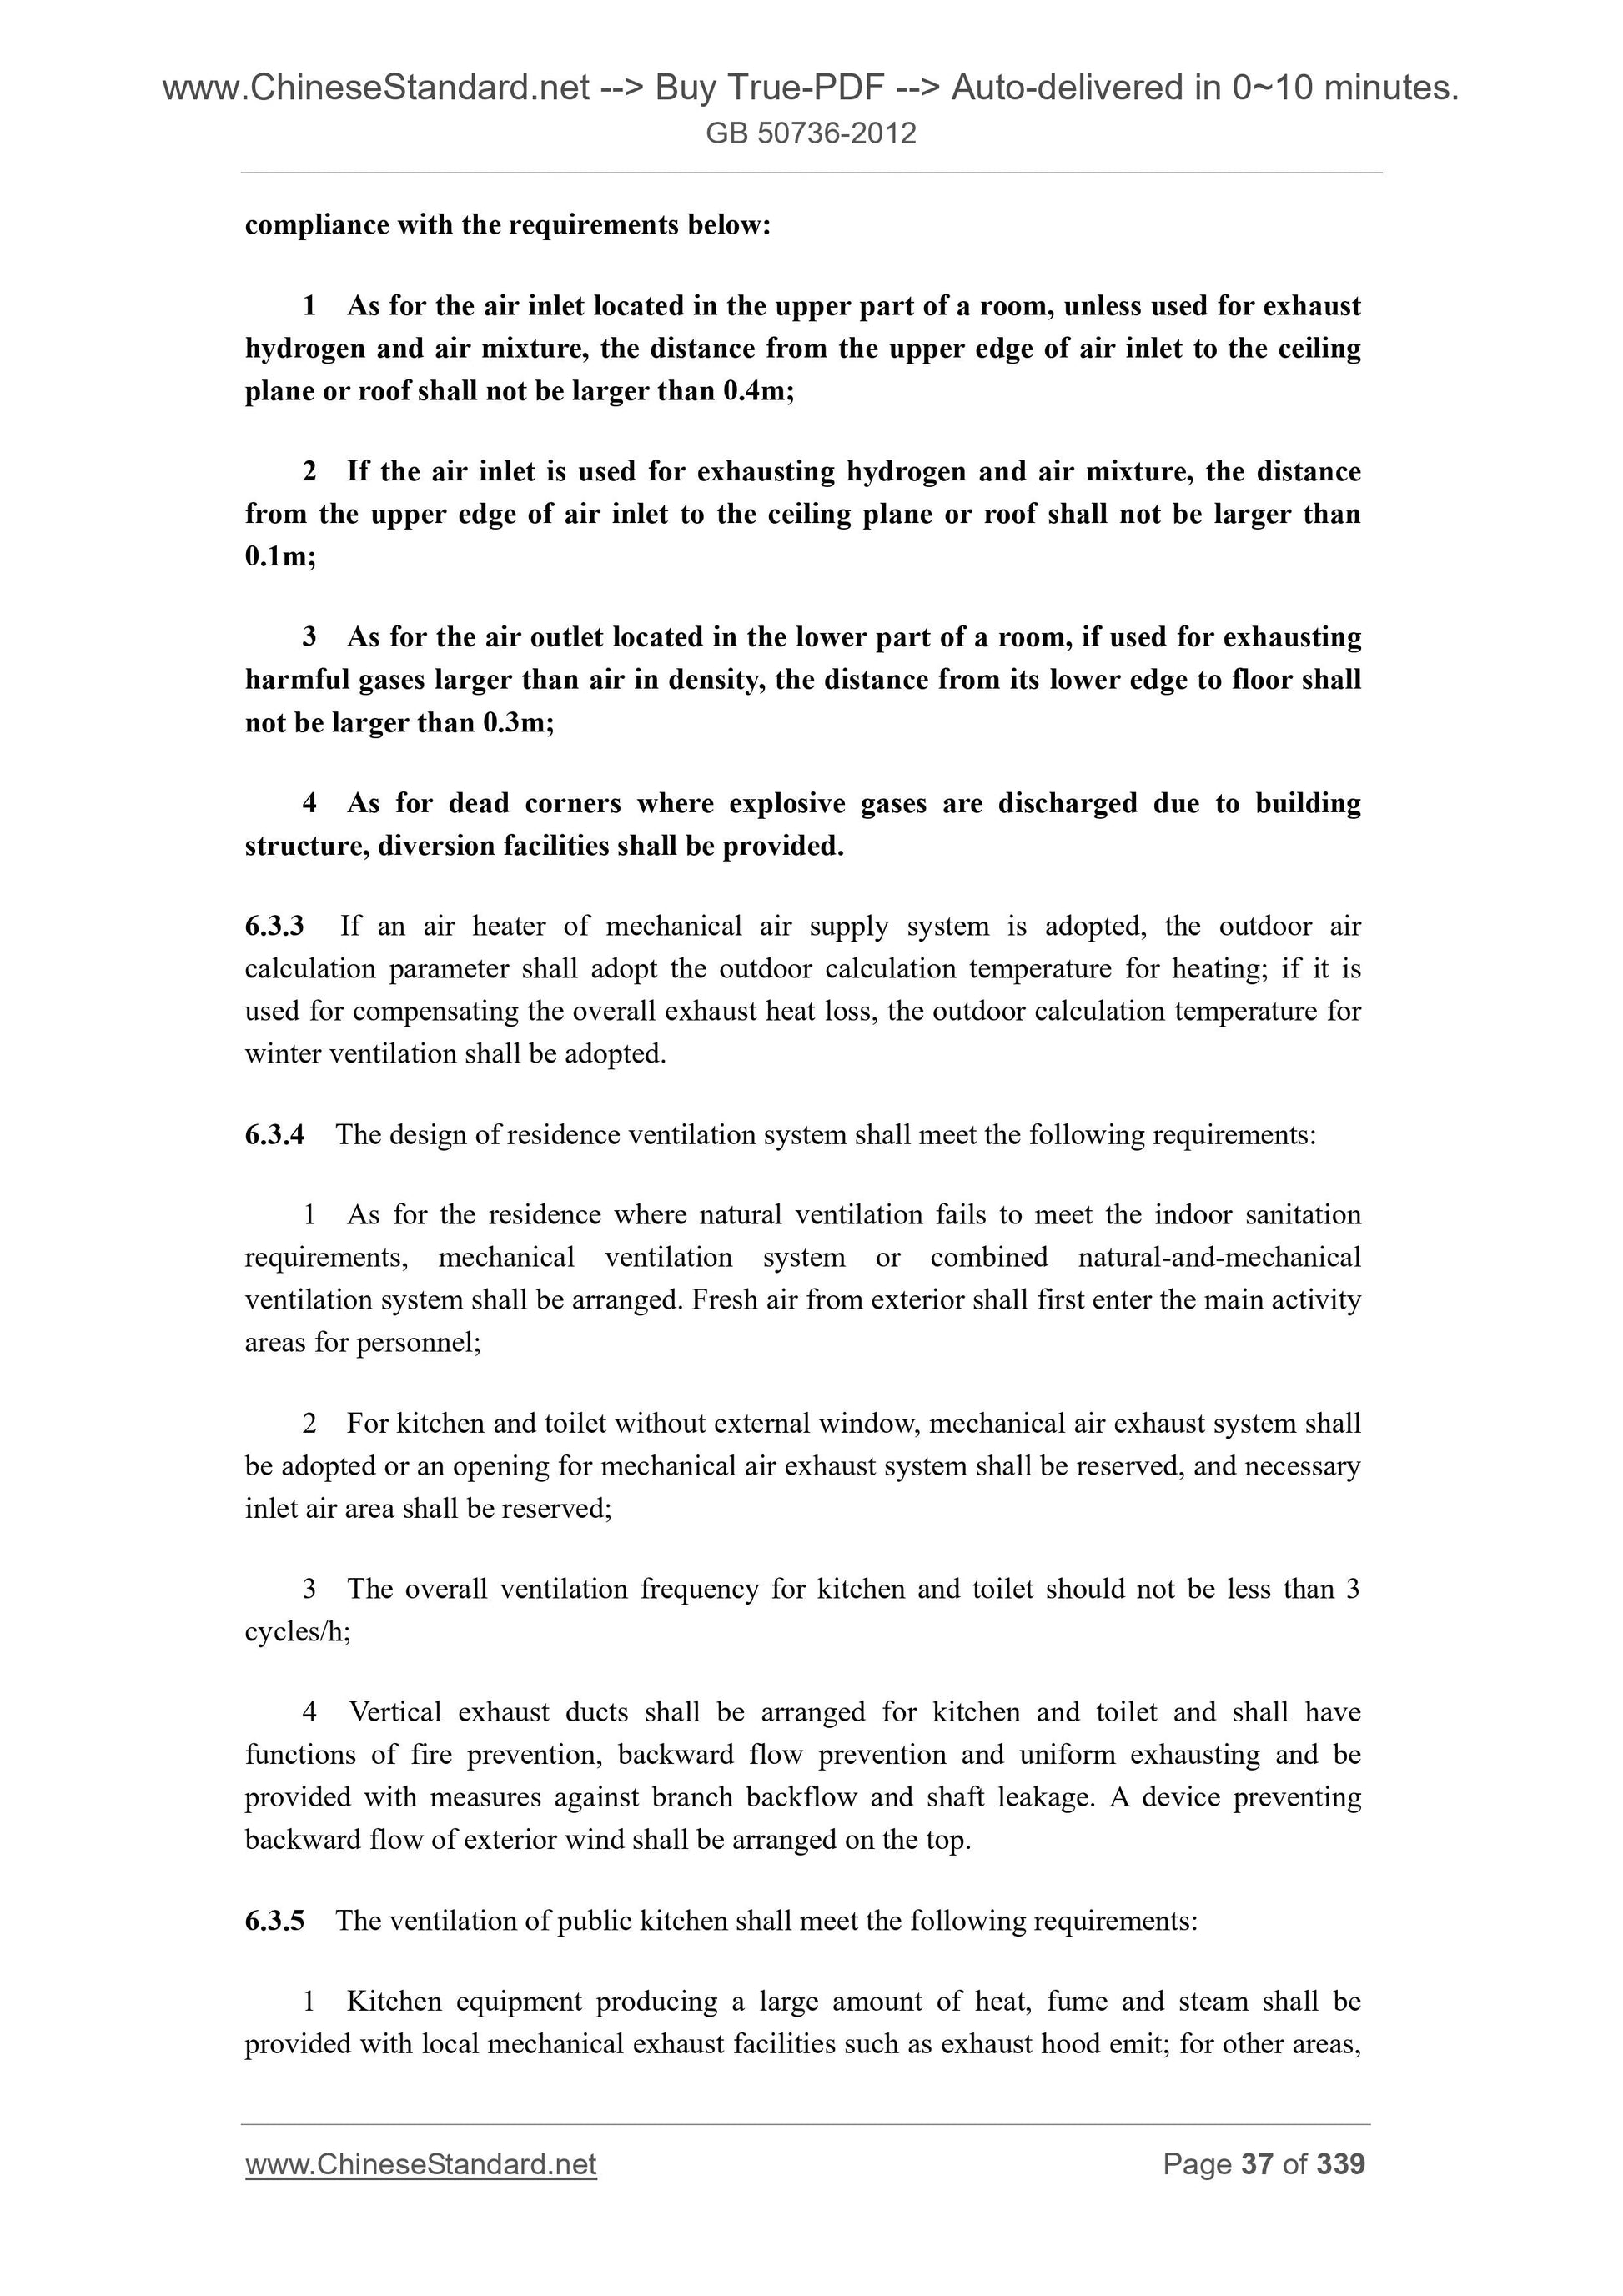 GB 50736-2012 Page 10